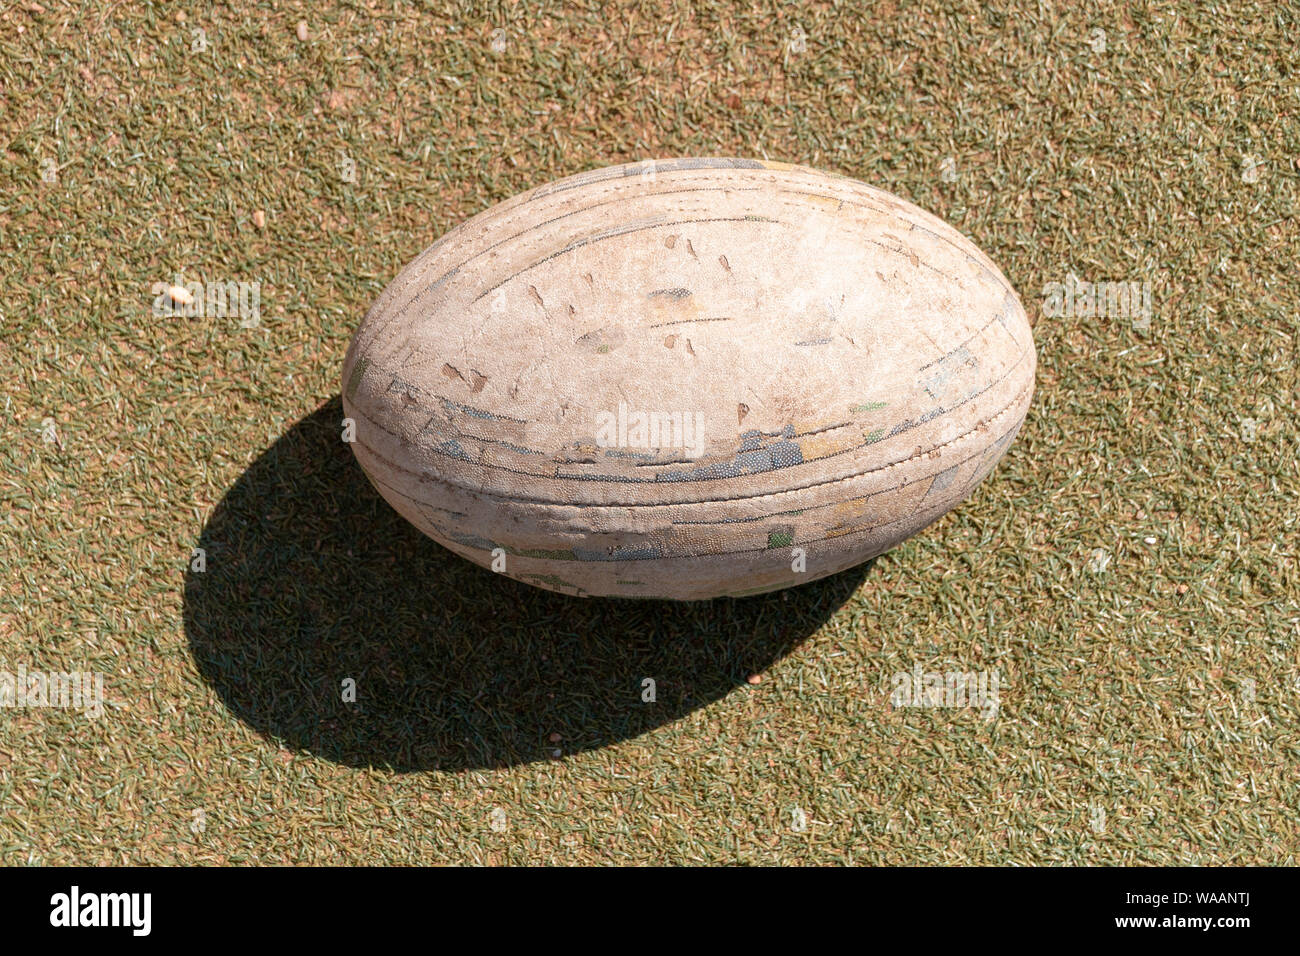 A close up side view of rugby ball on a green grass background Stock Photo